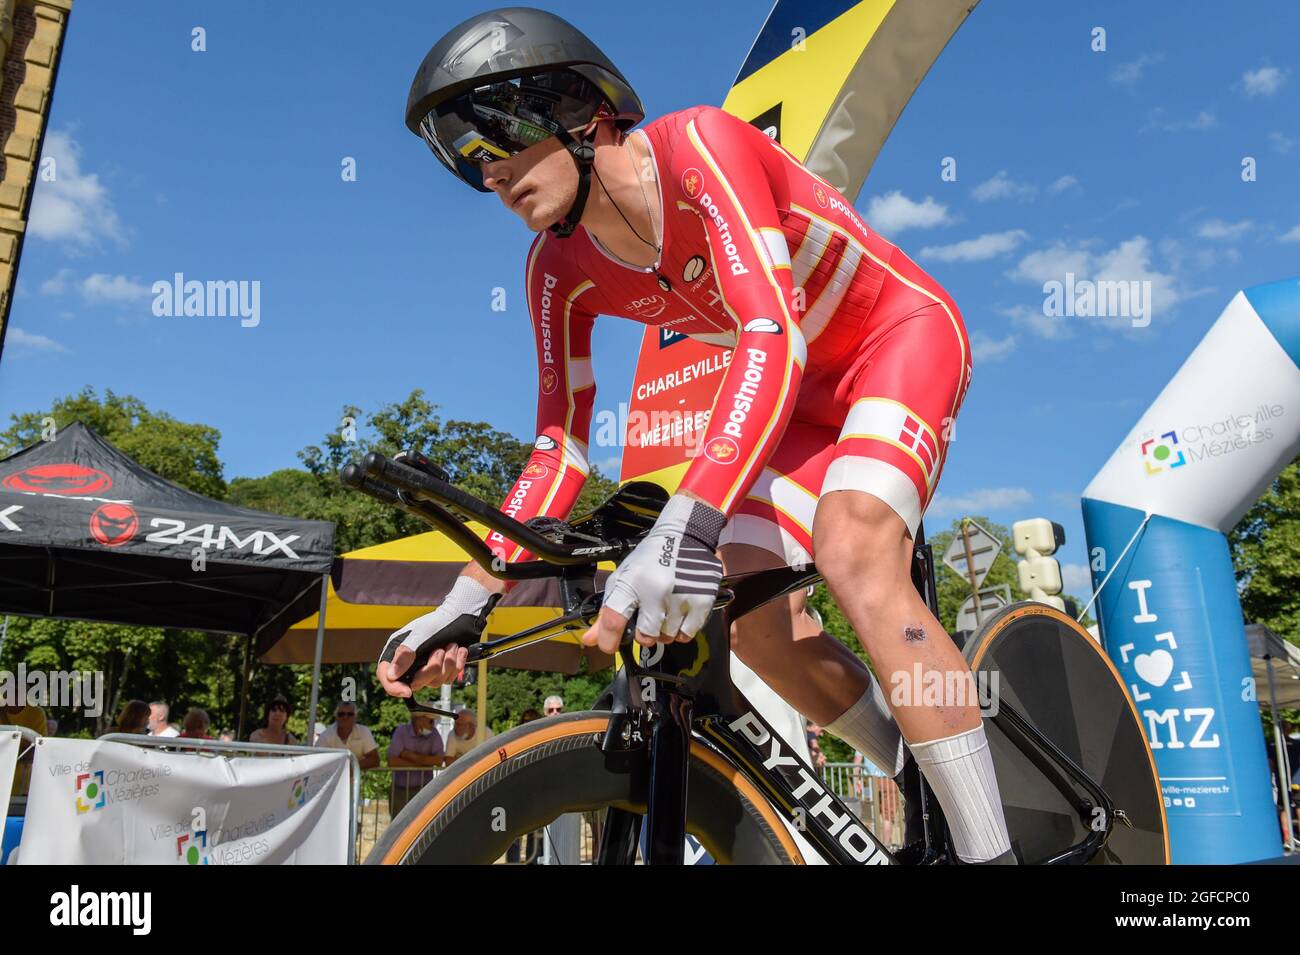 Marcus Sander Hansen seen in action at the start of the prologue. The Tour  de l'Avenir is an international cycling race by stage reserved for riders  under 23 years old. It takes